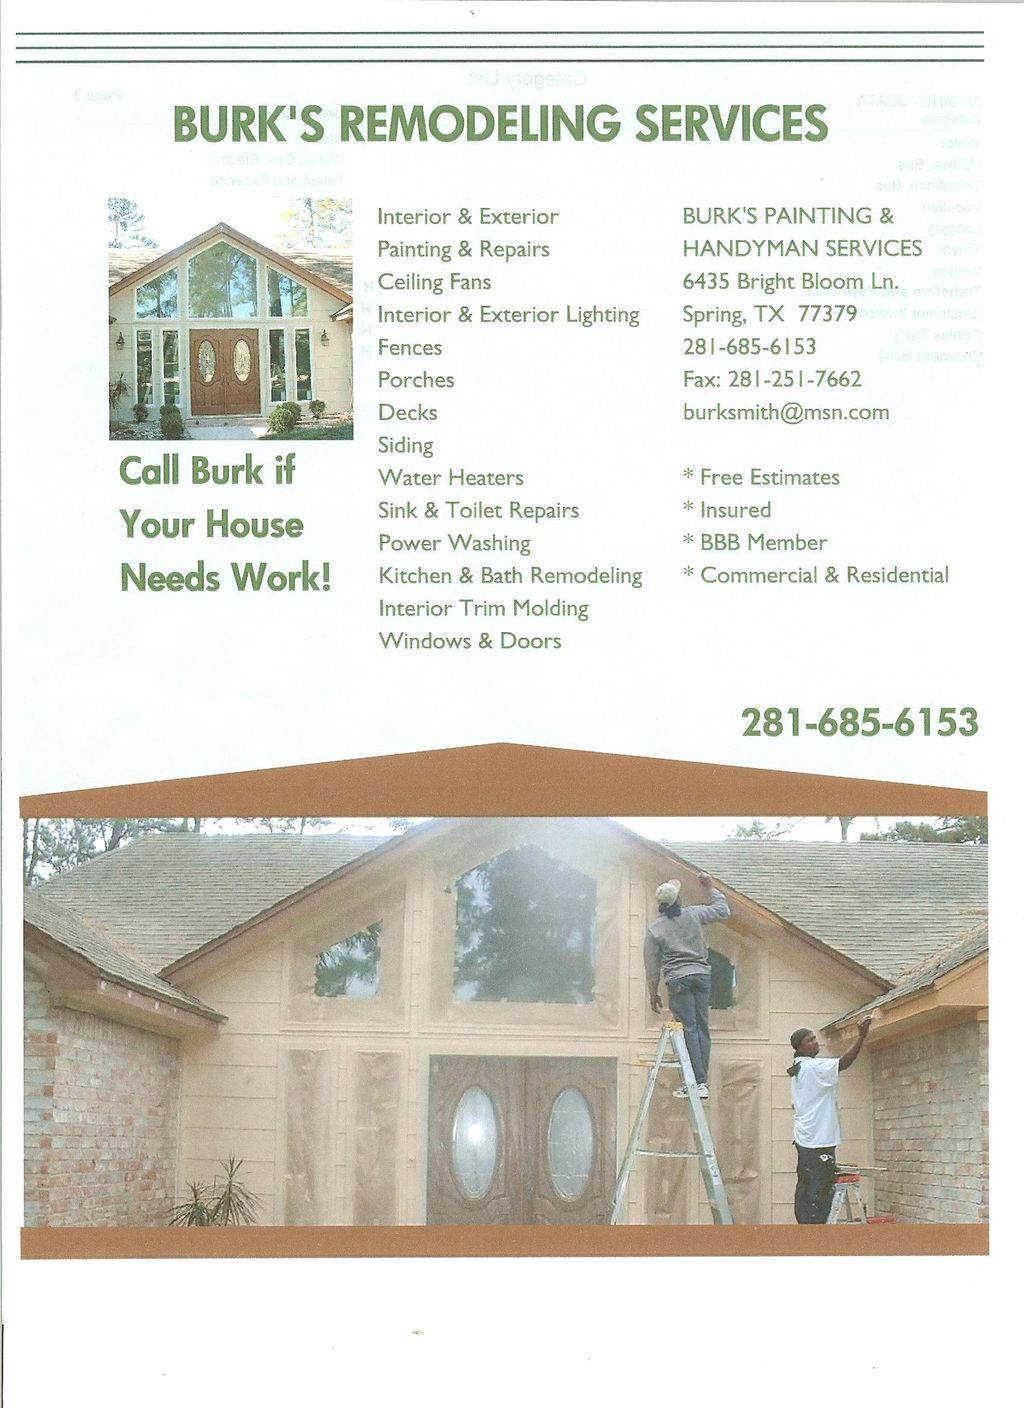 BURK'S Painting & Remodeling